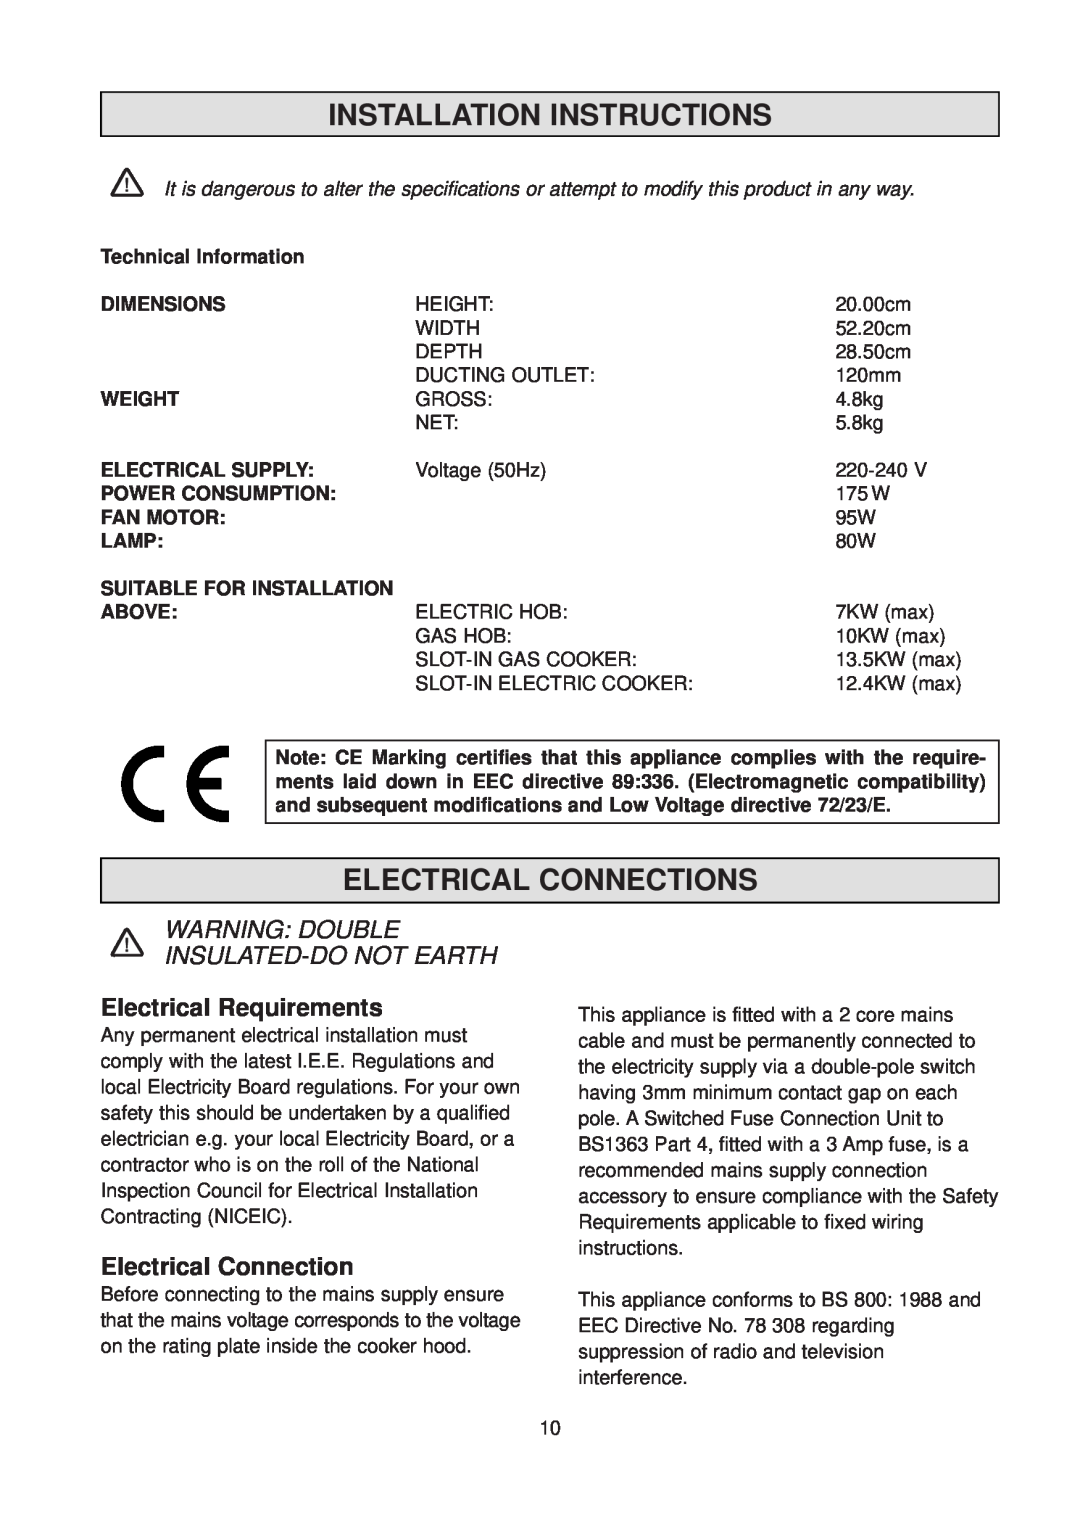 Zanussi CH 6029 GR Installation Instructions, Electrical Connections, Electrical Requirements, Technical Information, Lamp 